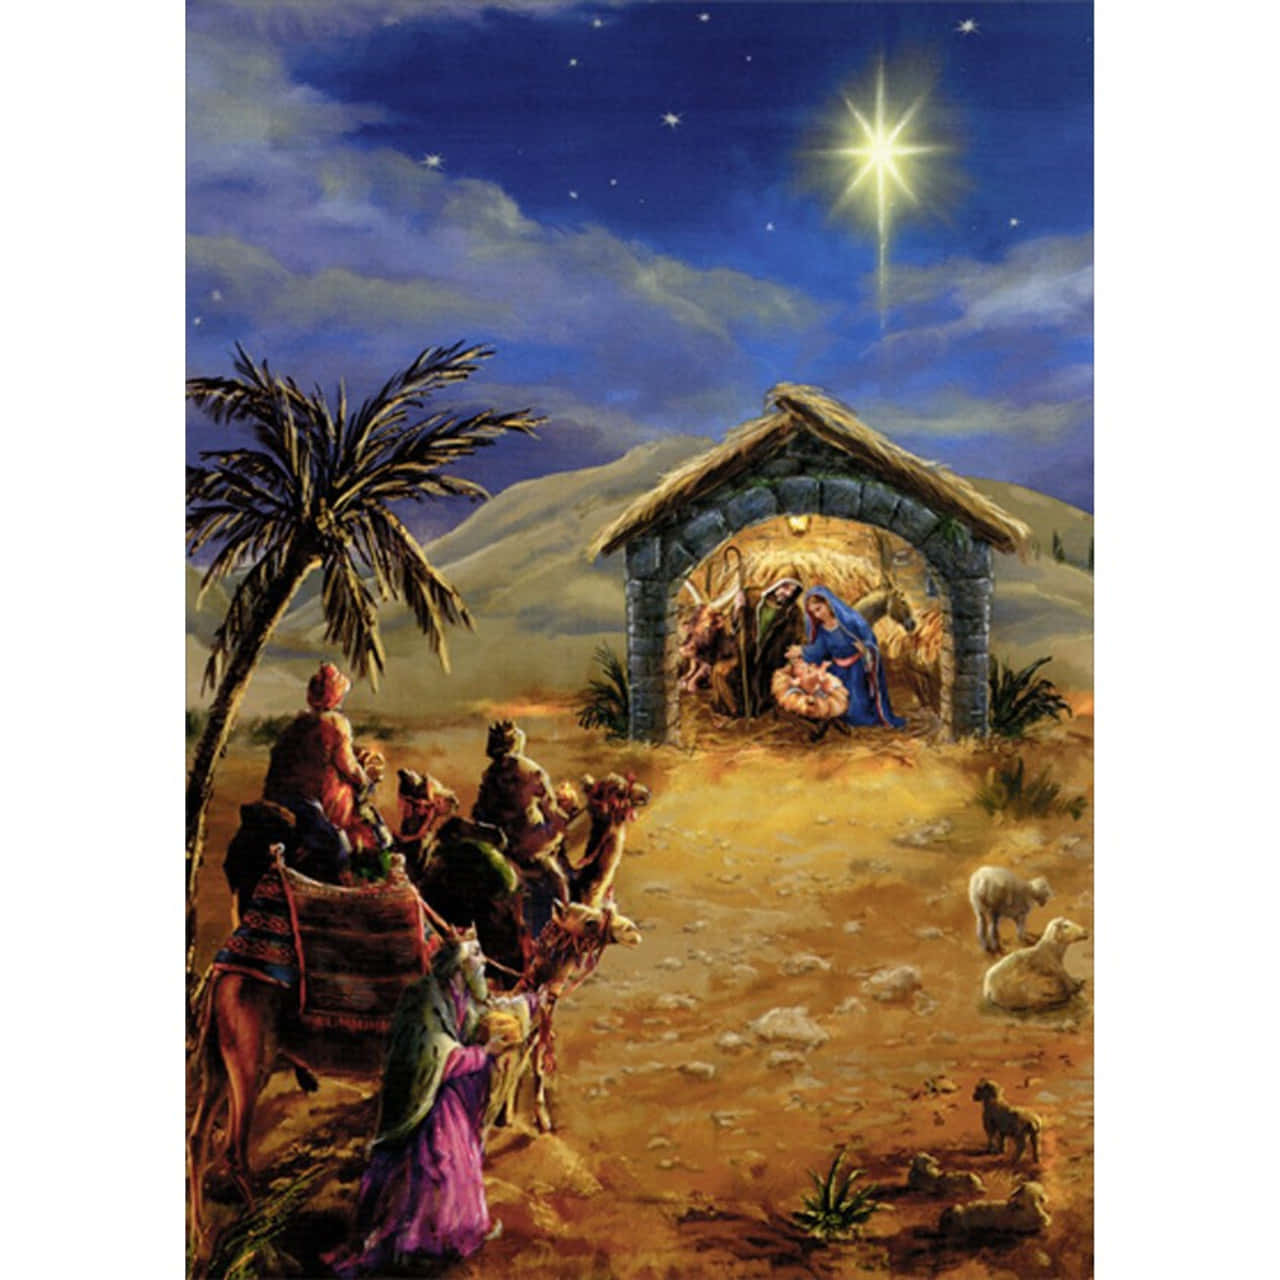 Bring Joy this Holiday Season with the Rejoicing of Christ’s Birth